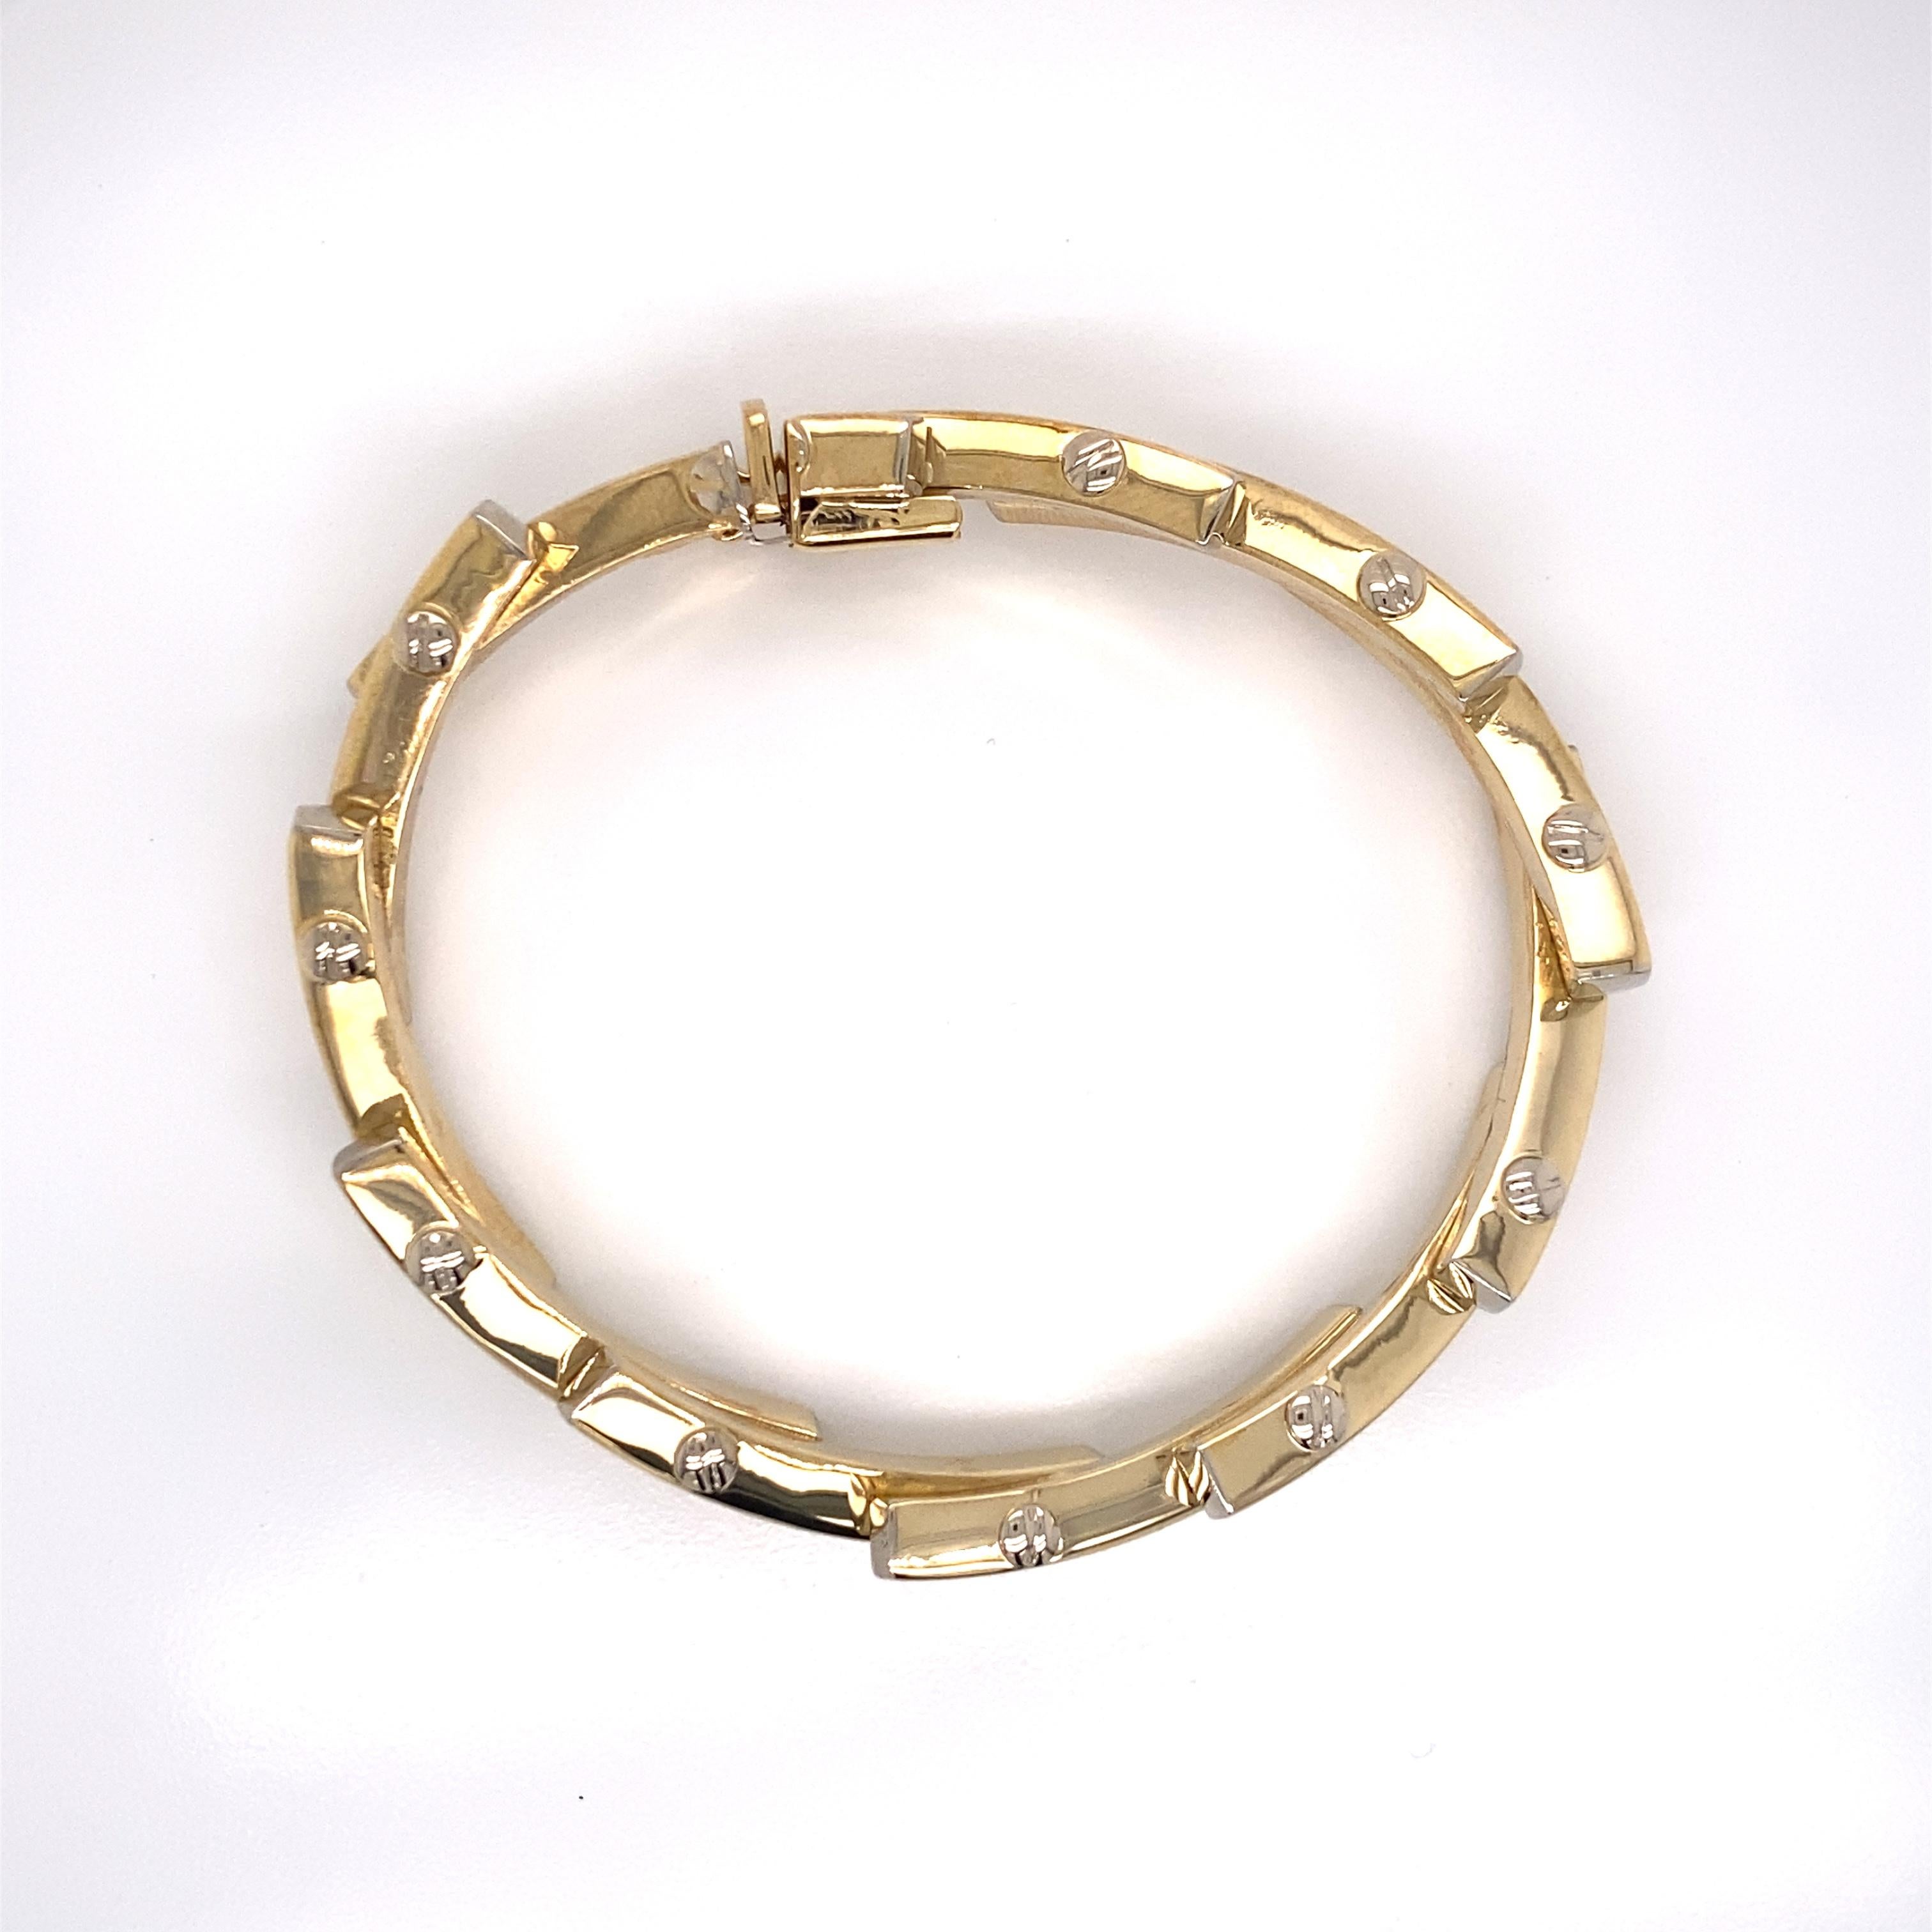 Contemporary Vintage 1990's 14k Yellow Gold Italian Made Link Bracelet For Sale